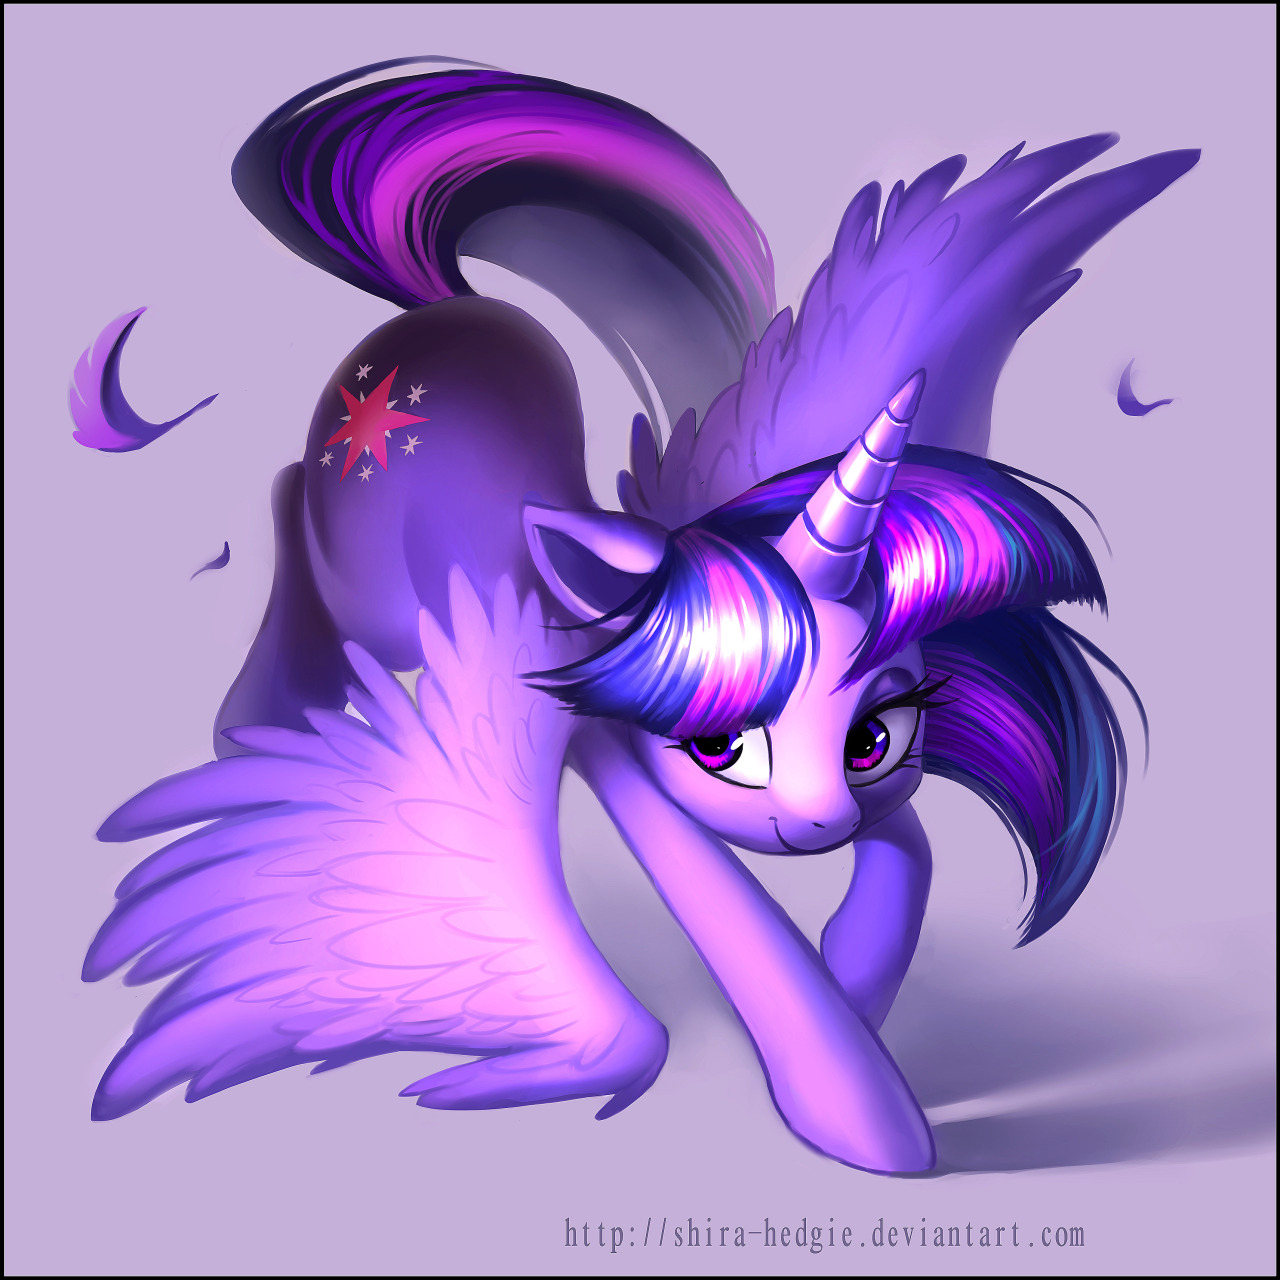 shira-hedgie:  PoniesPoniesPoniesPoniesPonies.. I’m not really a Brony but admit